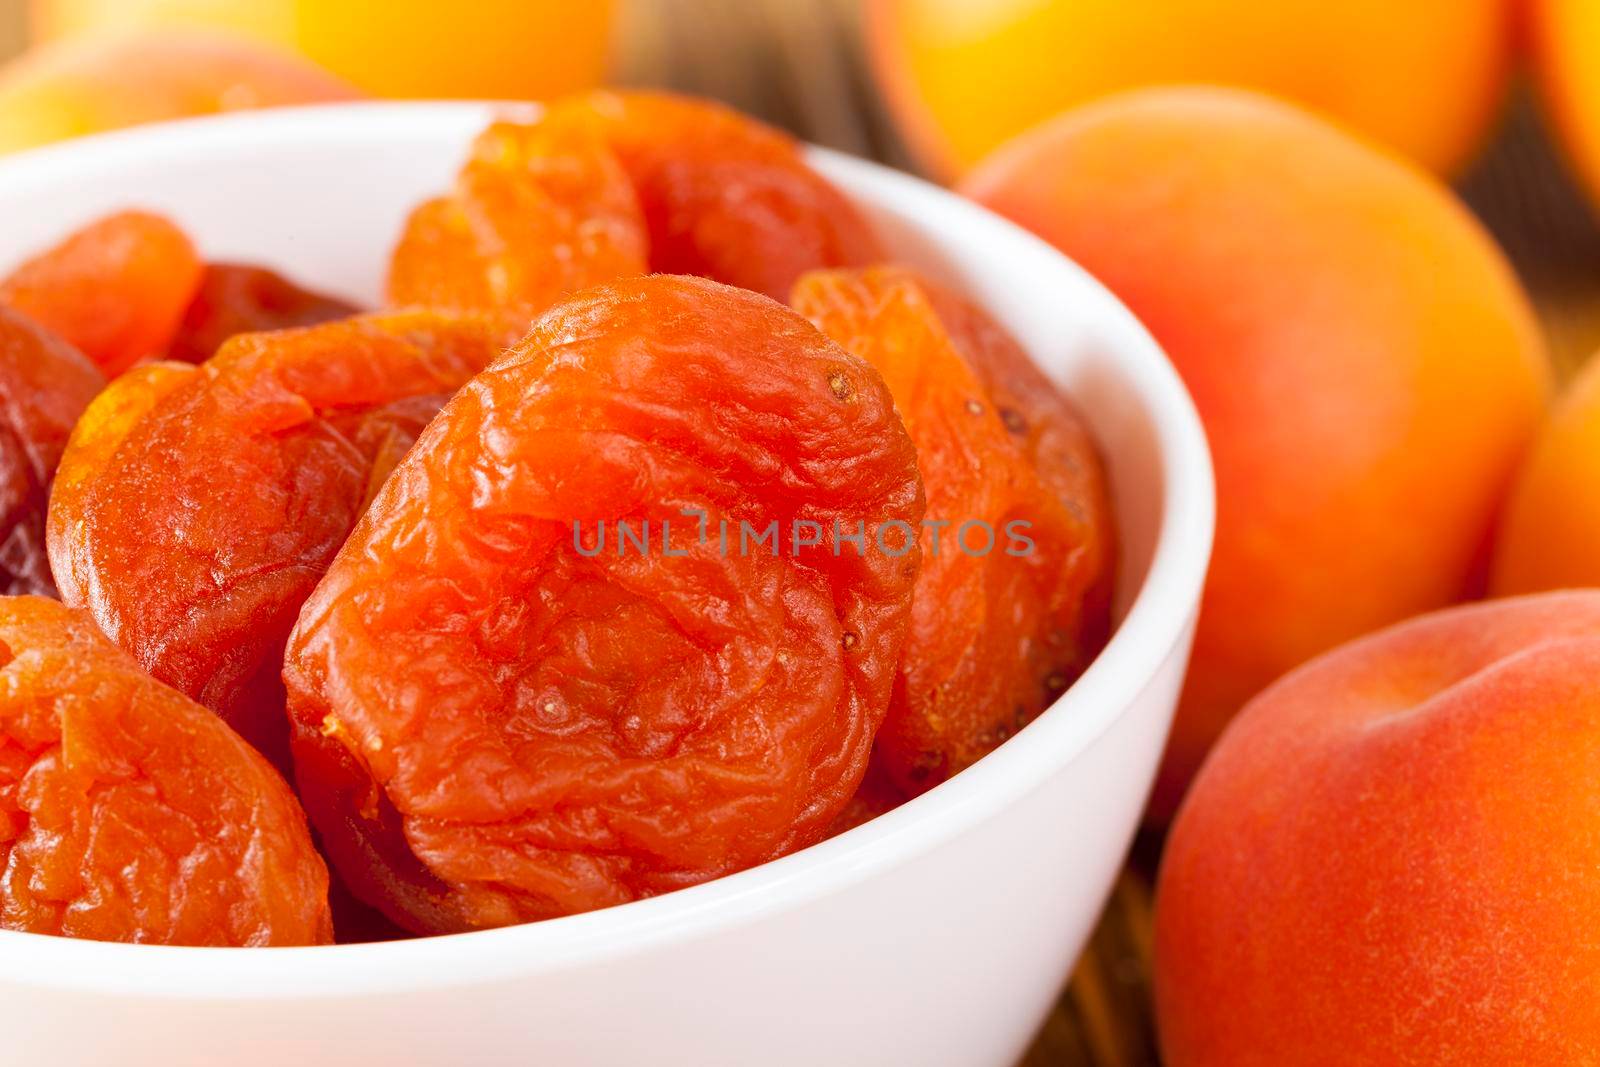 Dried apricots by avq